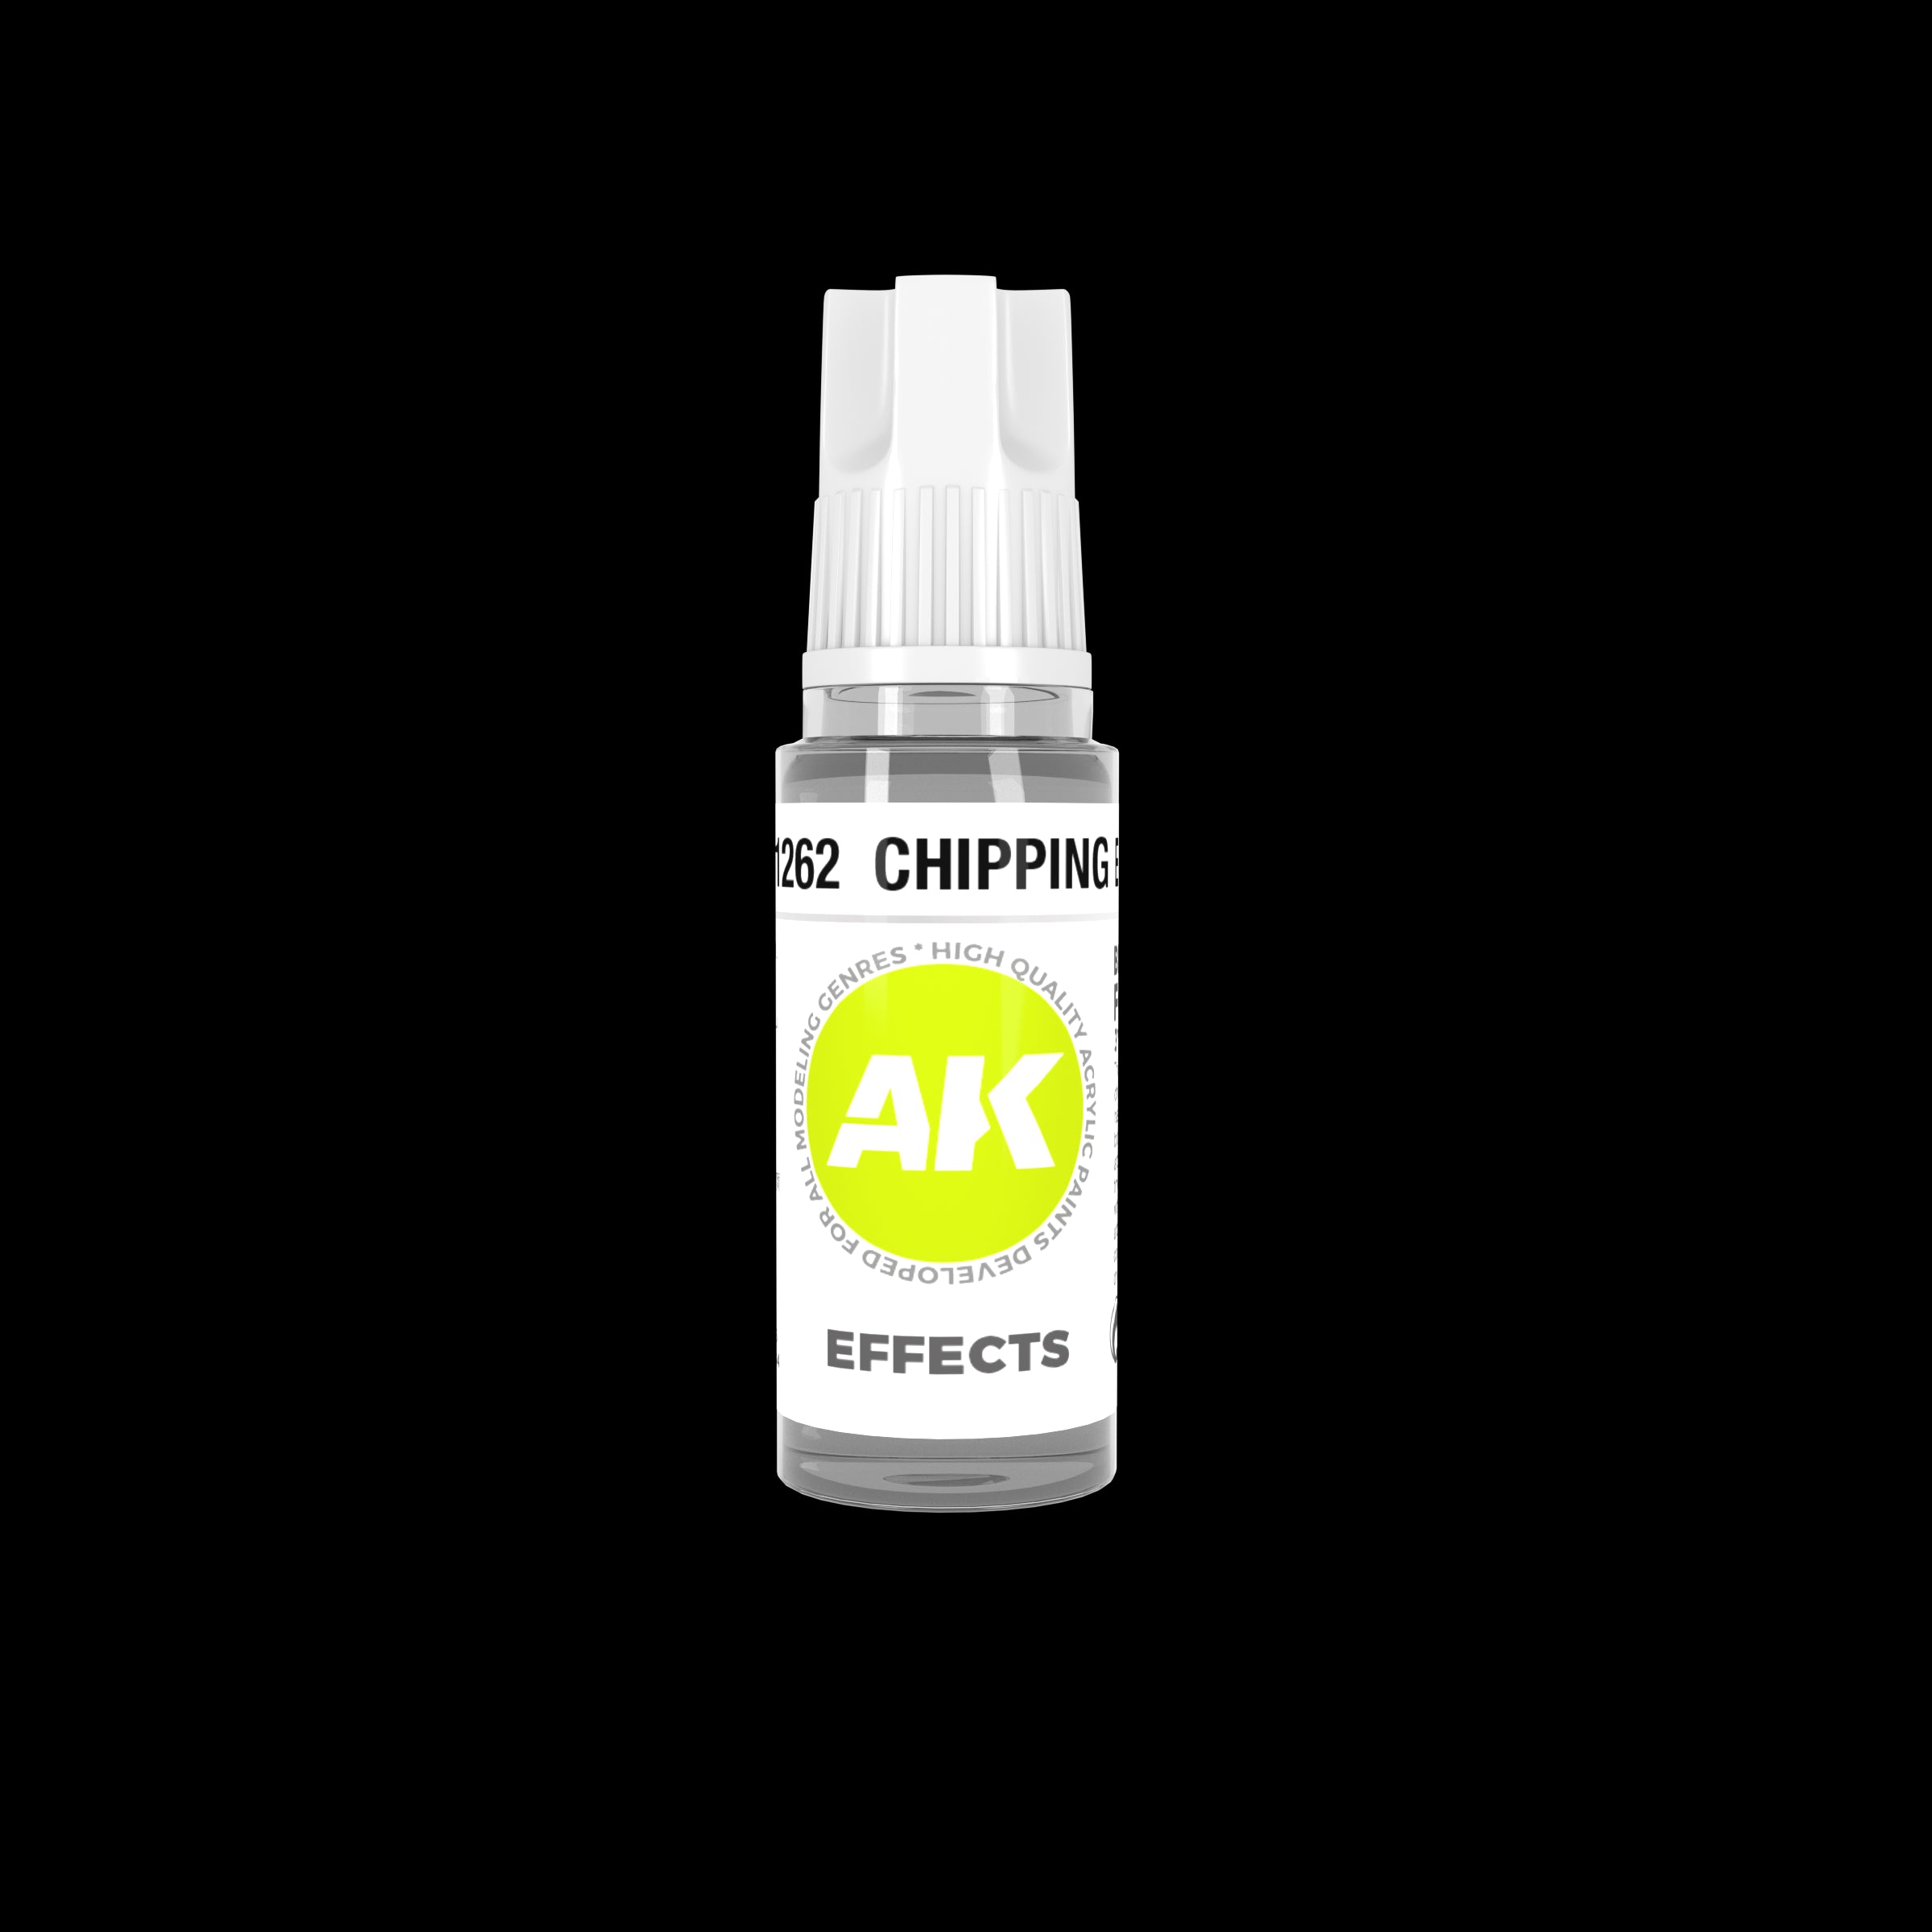 AK-11262 Chipping Effects 17 ml